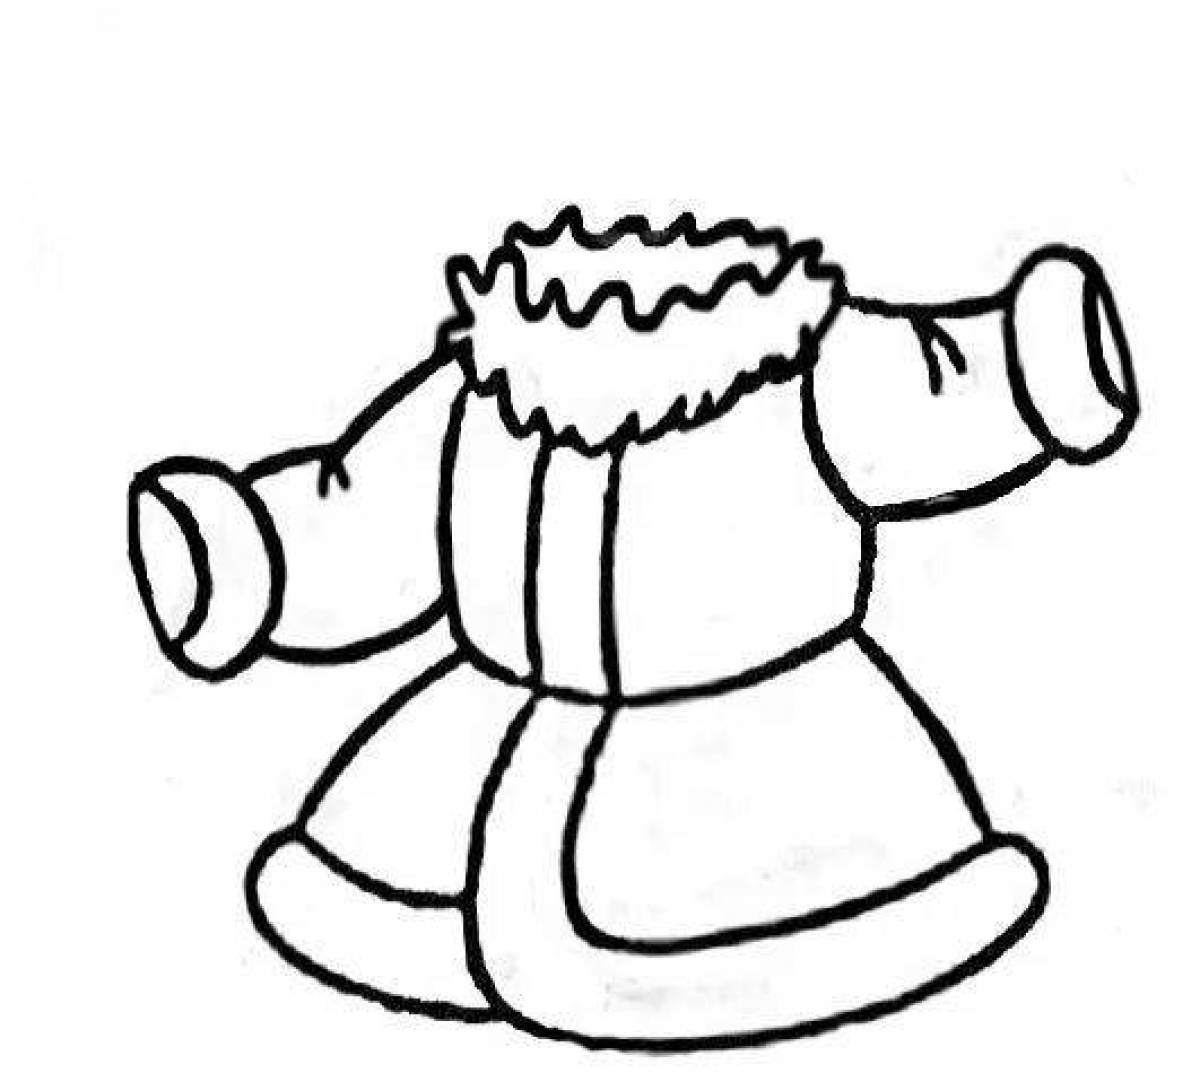 Coloring page Flawless coat for teens